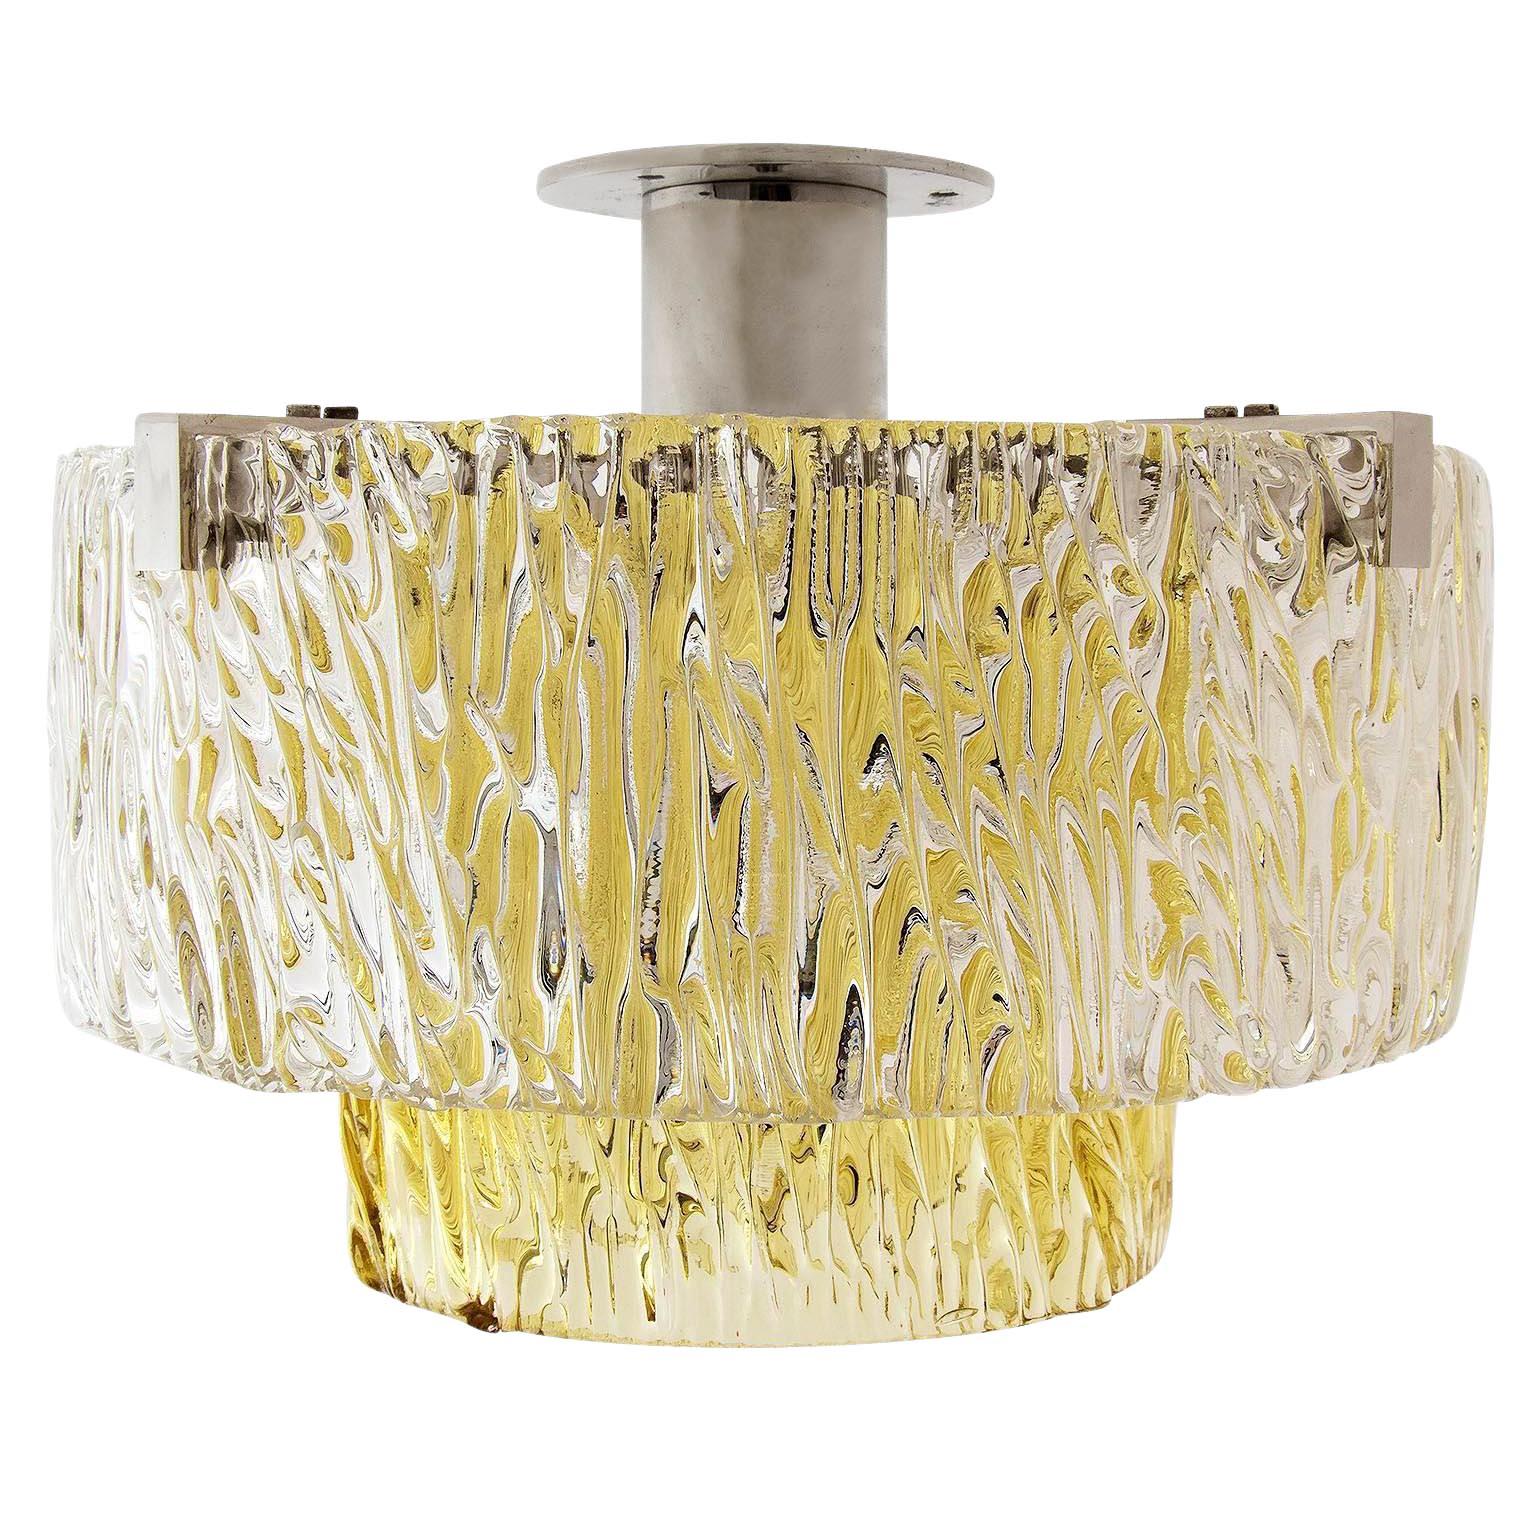 One of two fantastic textured glass and nickel-plated brass flushmount light fixtures by J.T. Kalmar, Austria, manufactured in midcentury, circa 1960. 
The outer tier is made of two clear glass half rings. The inner ring is made of one piece of